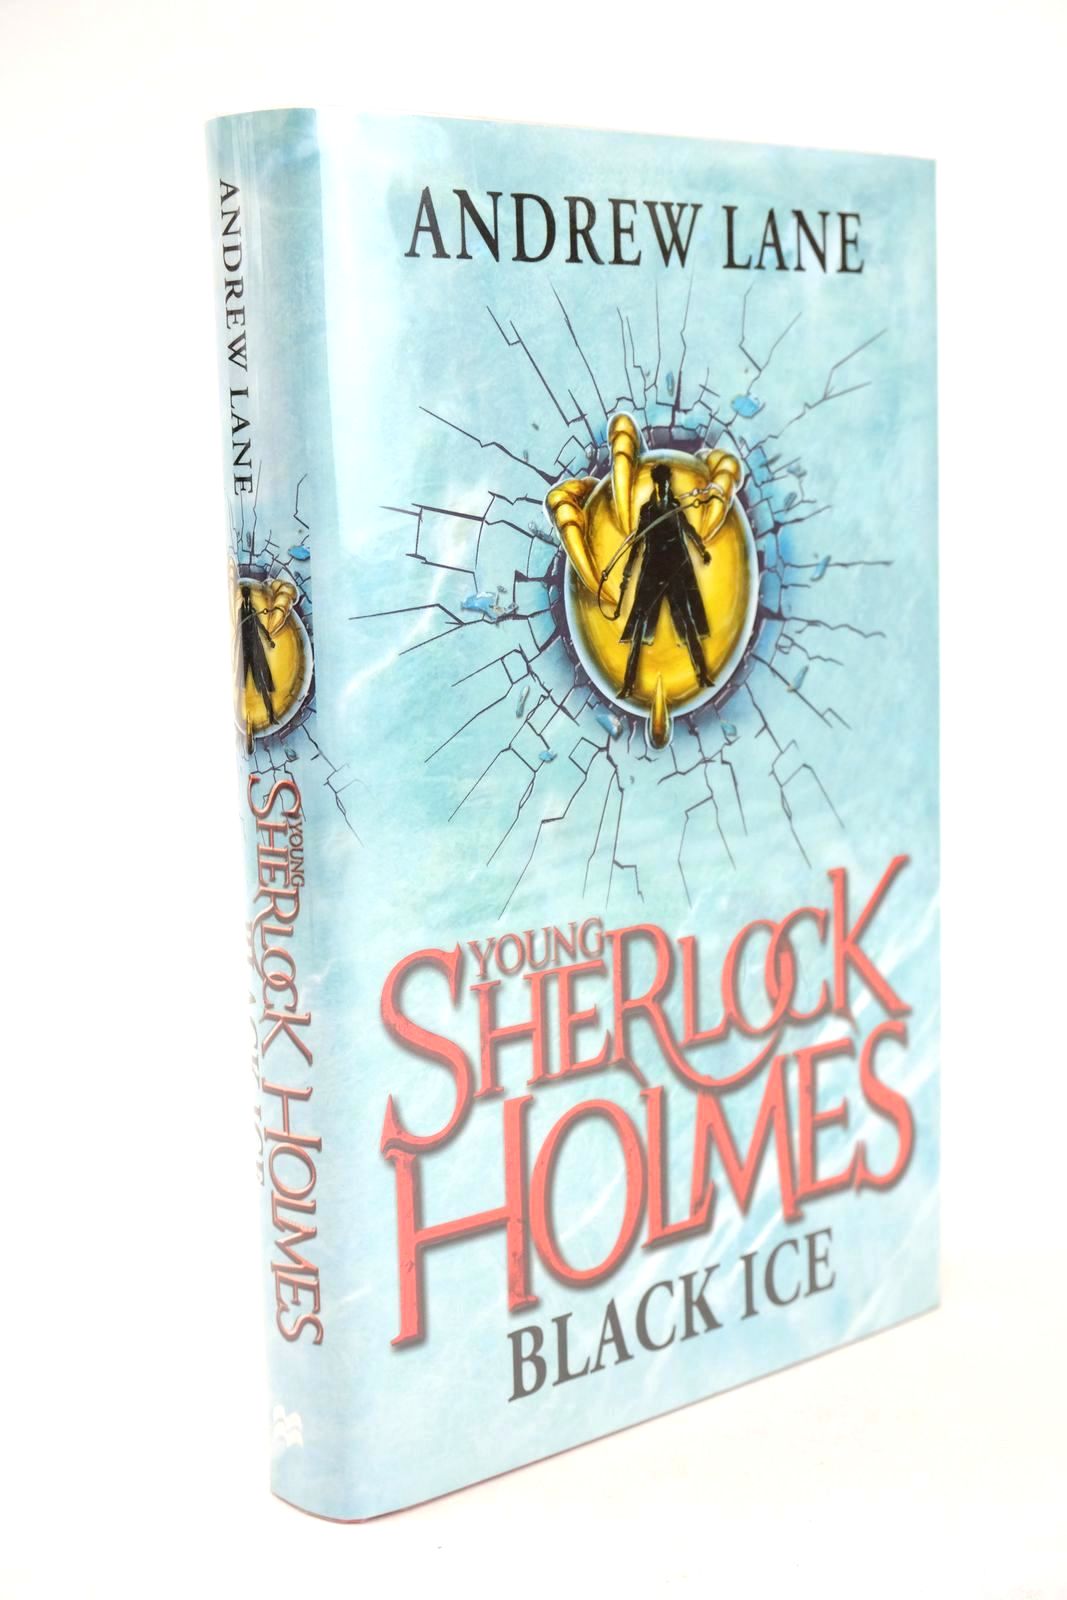 Photo of YOUNG SHERLOCK HOLMES - BLACK ICE written by Lane, Andrew illustrated by Walker, Kev Hadley, Sam published by Macmillan Children's Books (STOCK CODE: 1325748)  for sale by Stella & Rose's Books